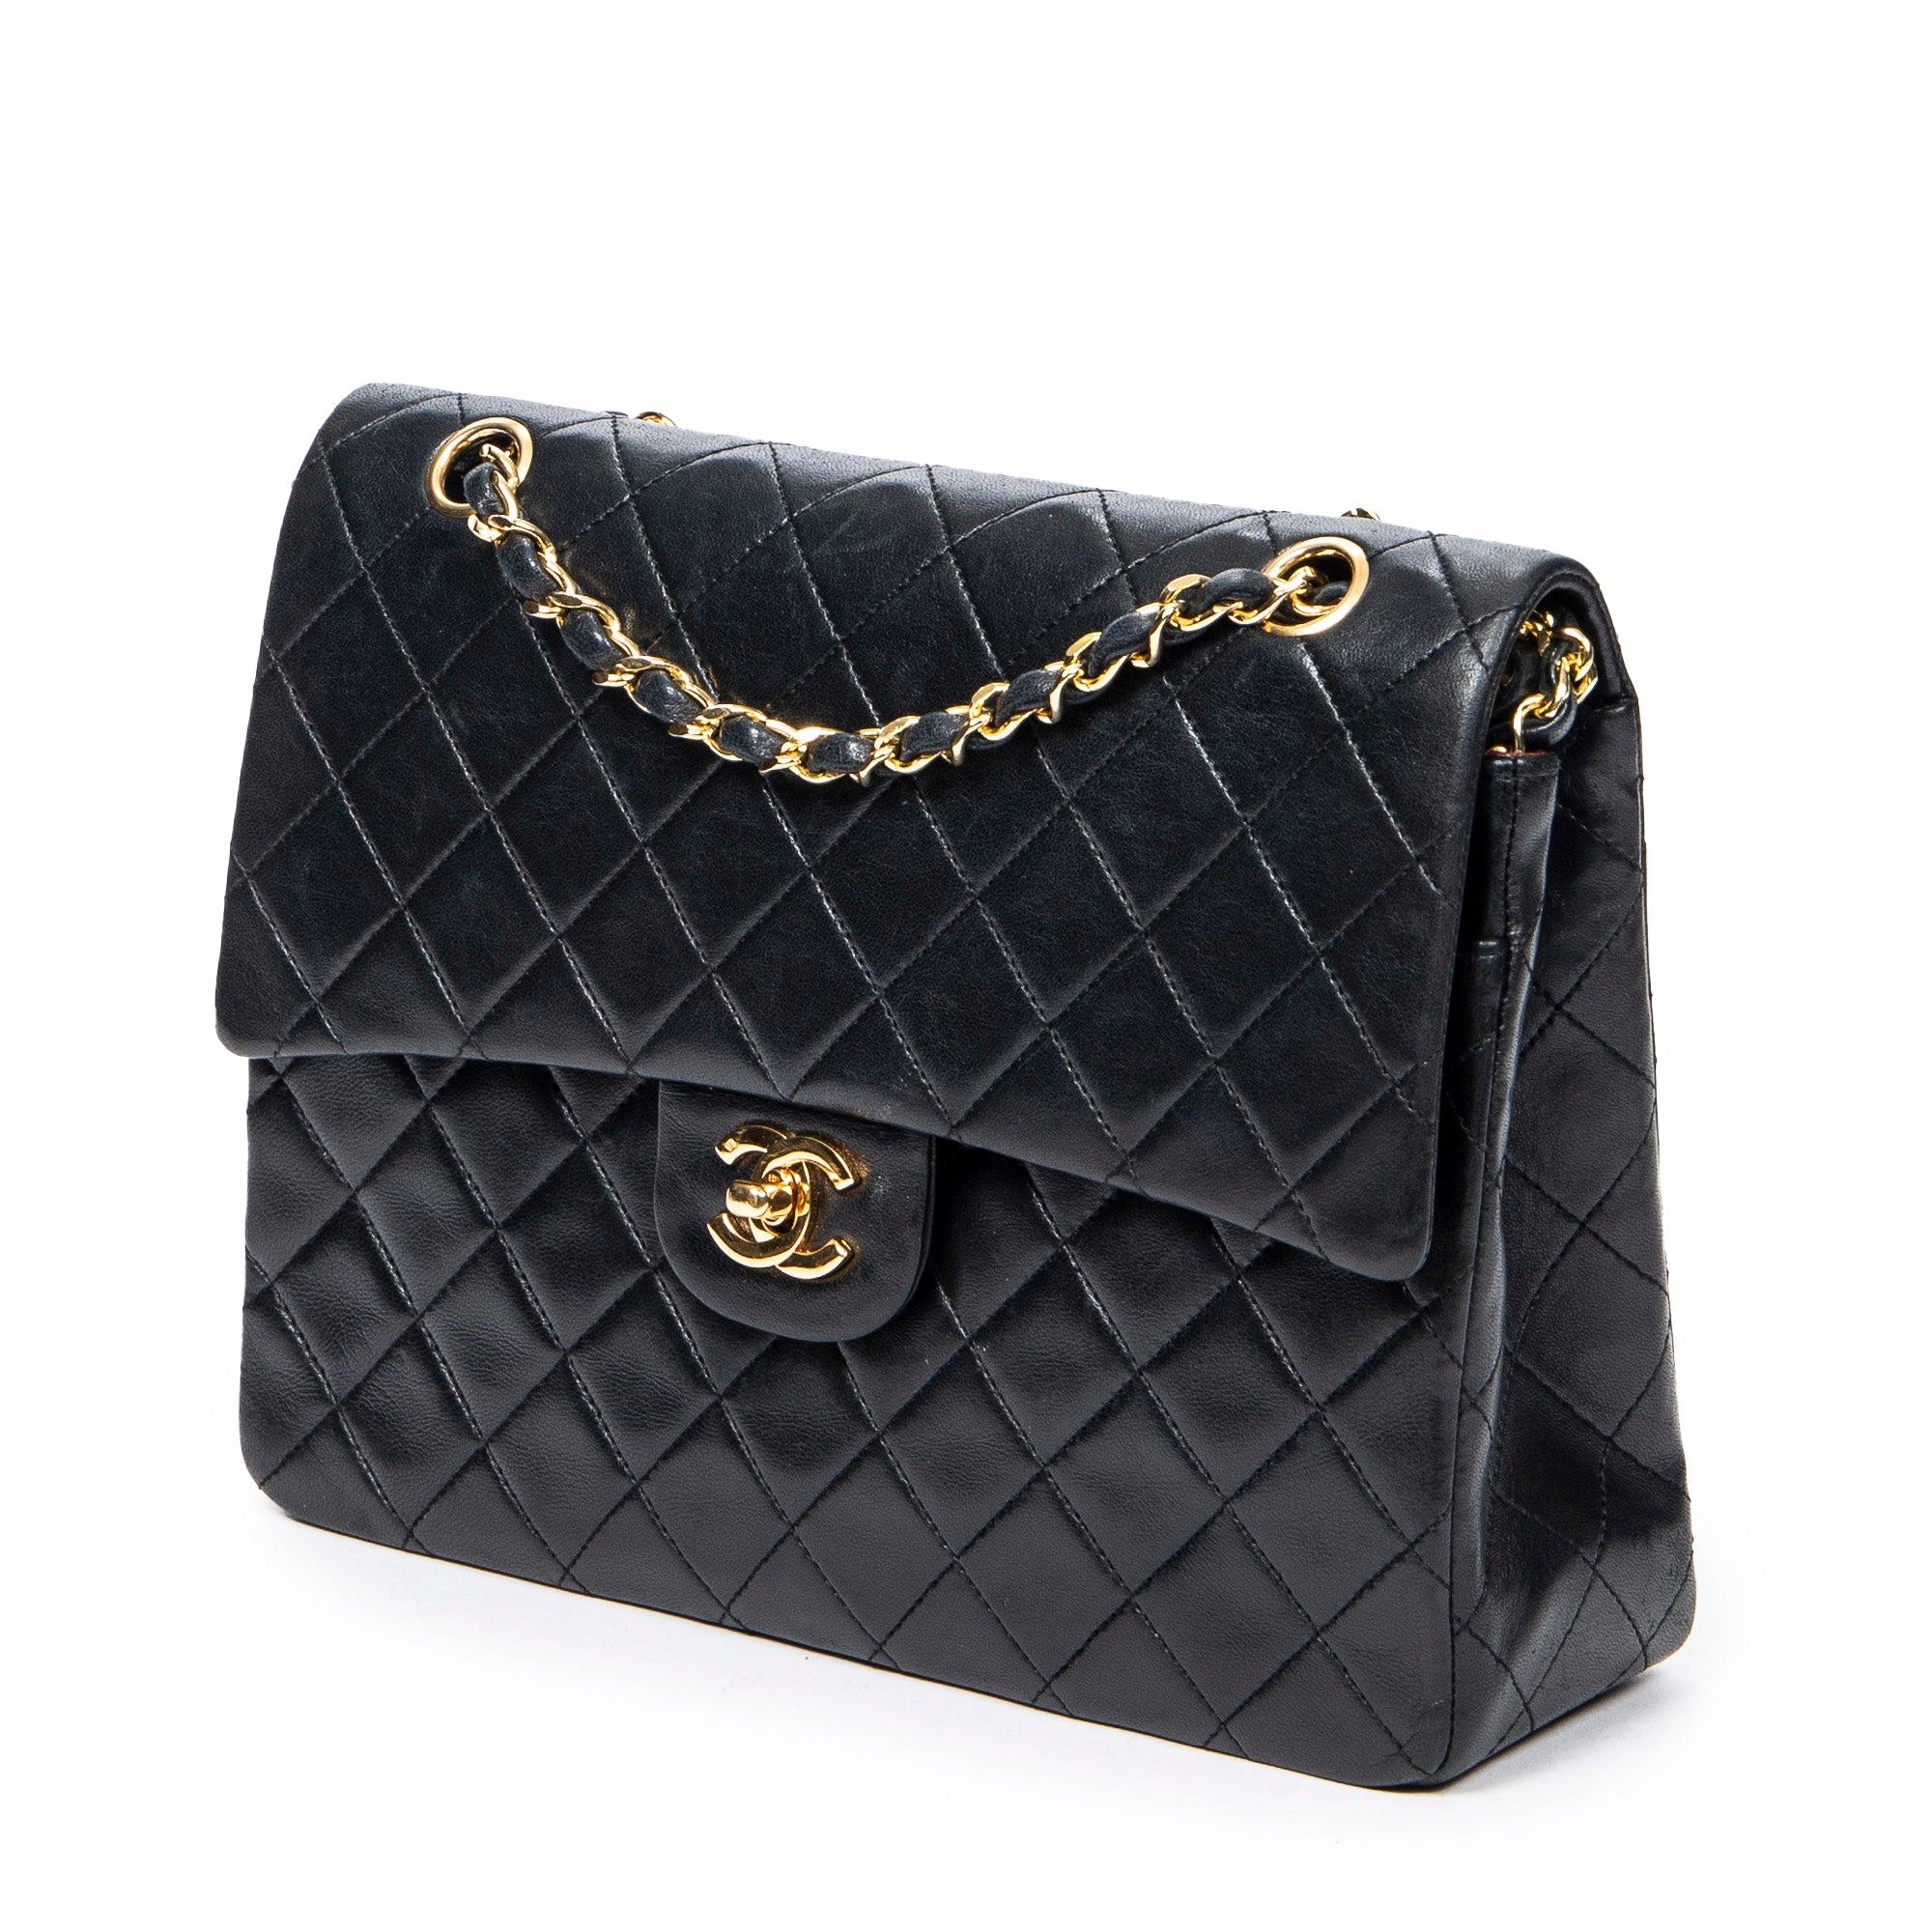 Chanel Pre Owned 1985-1993 Diamond Quilted Flap Shoulder Bag - ShopStyle